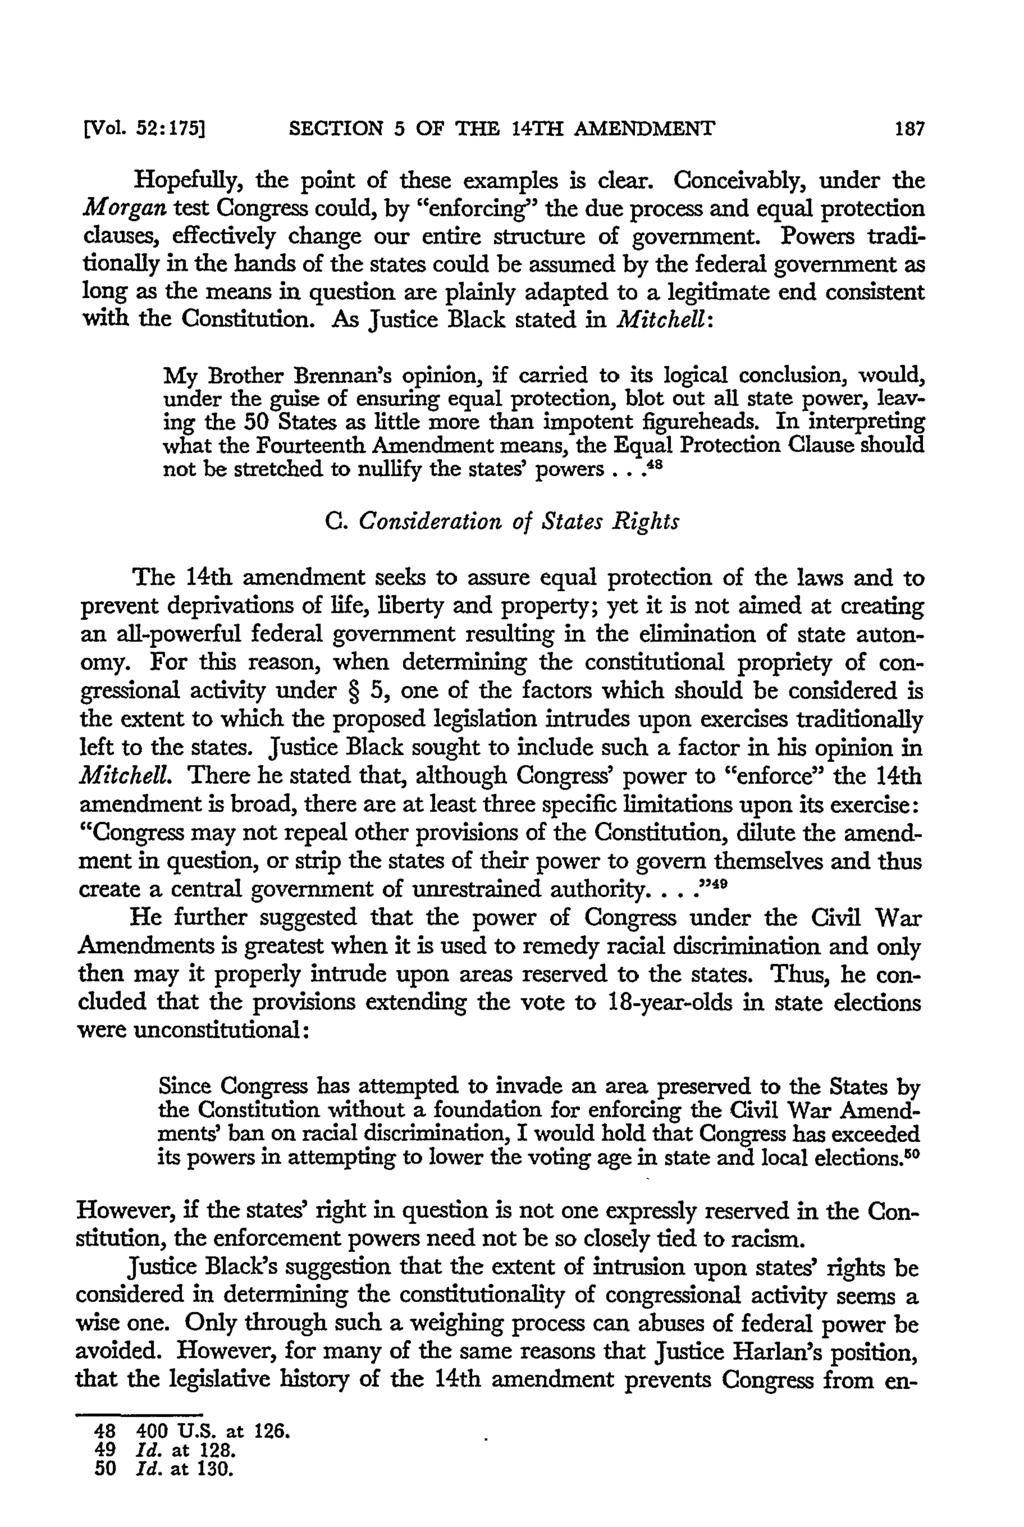 [Vol. 52:175] SECTION 5 OF THE 14TH AMENDMENT Hopefully, the point of these examples is clear.